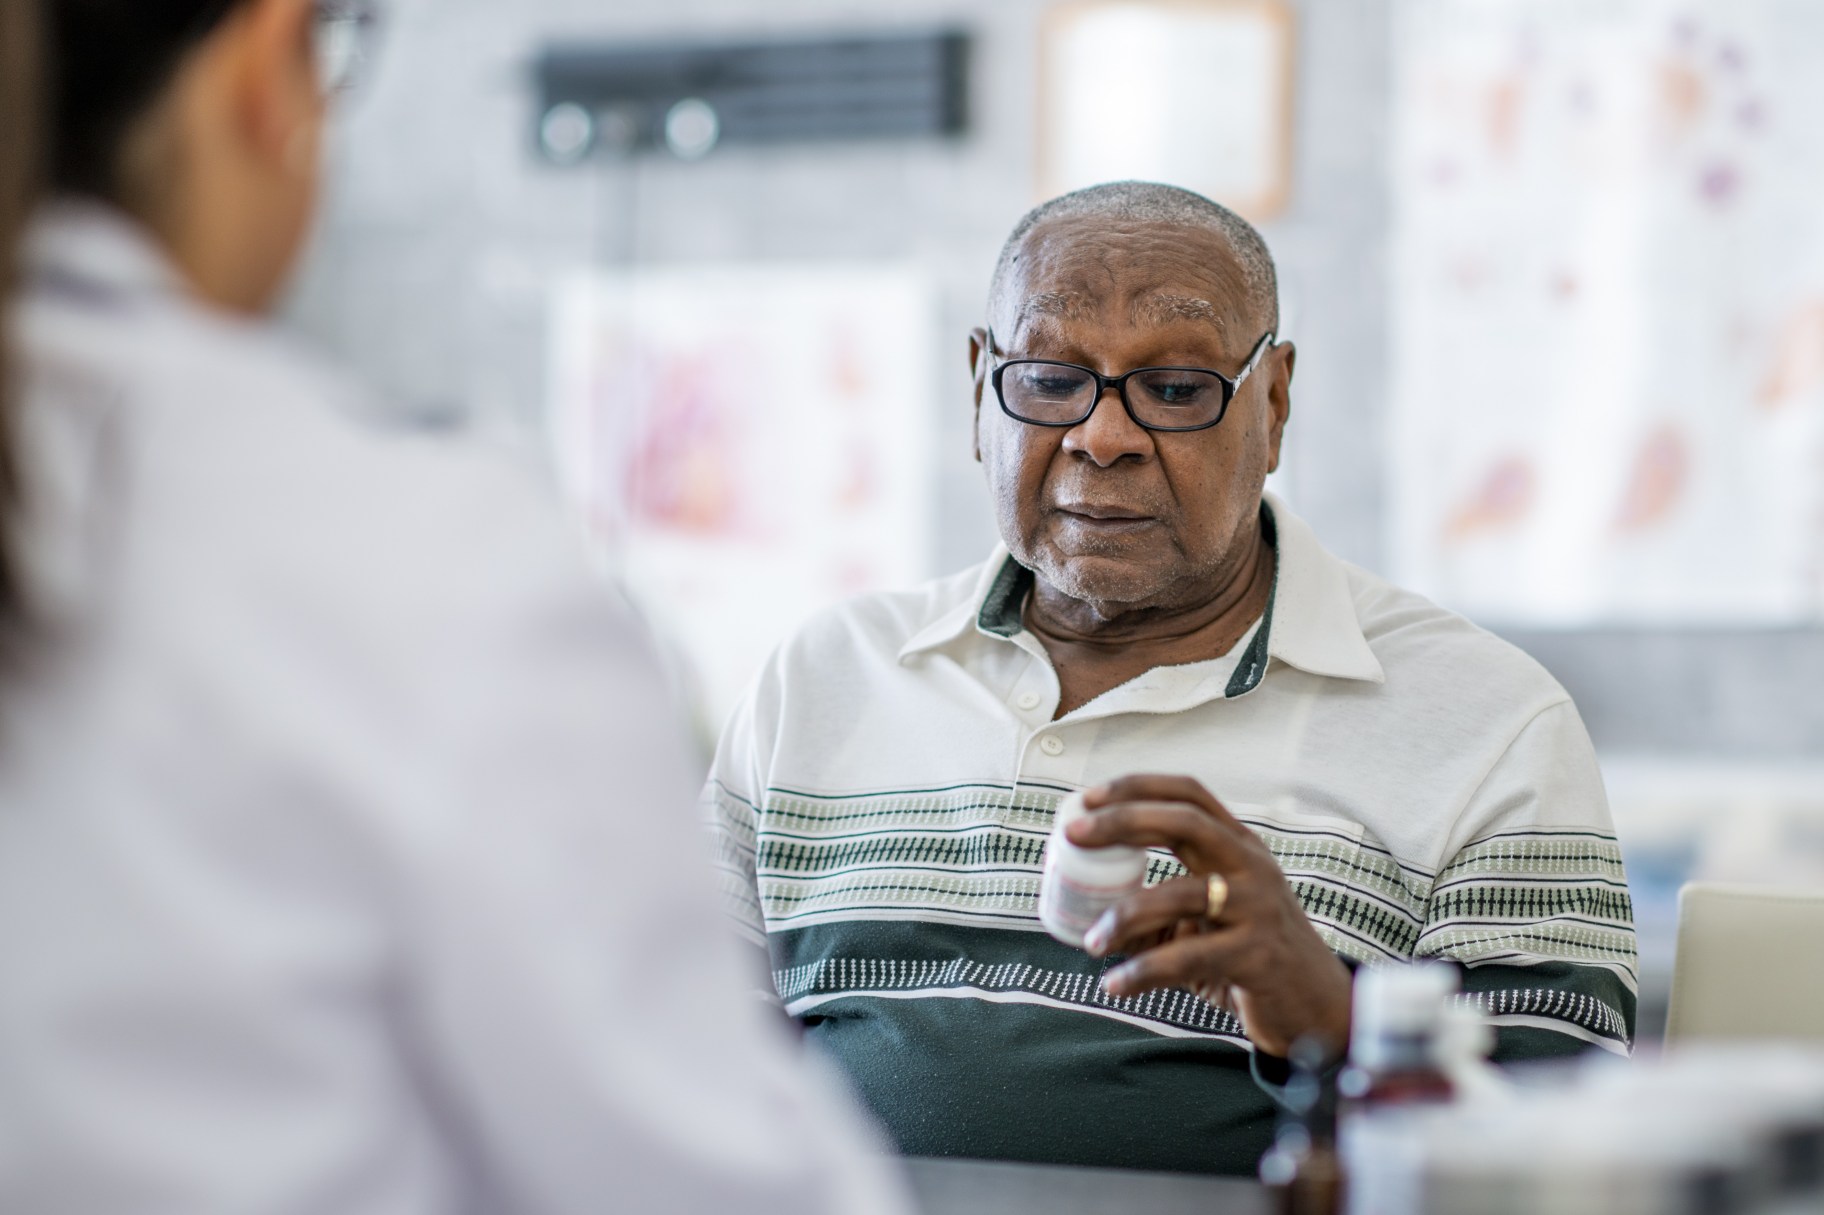 An elderly man looks at a pill bottle in his hand while sitting across the table from a doctor in the doctor's office. He appears to be making a decision about it.